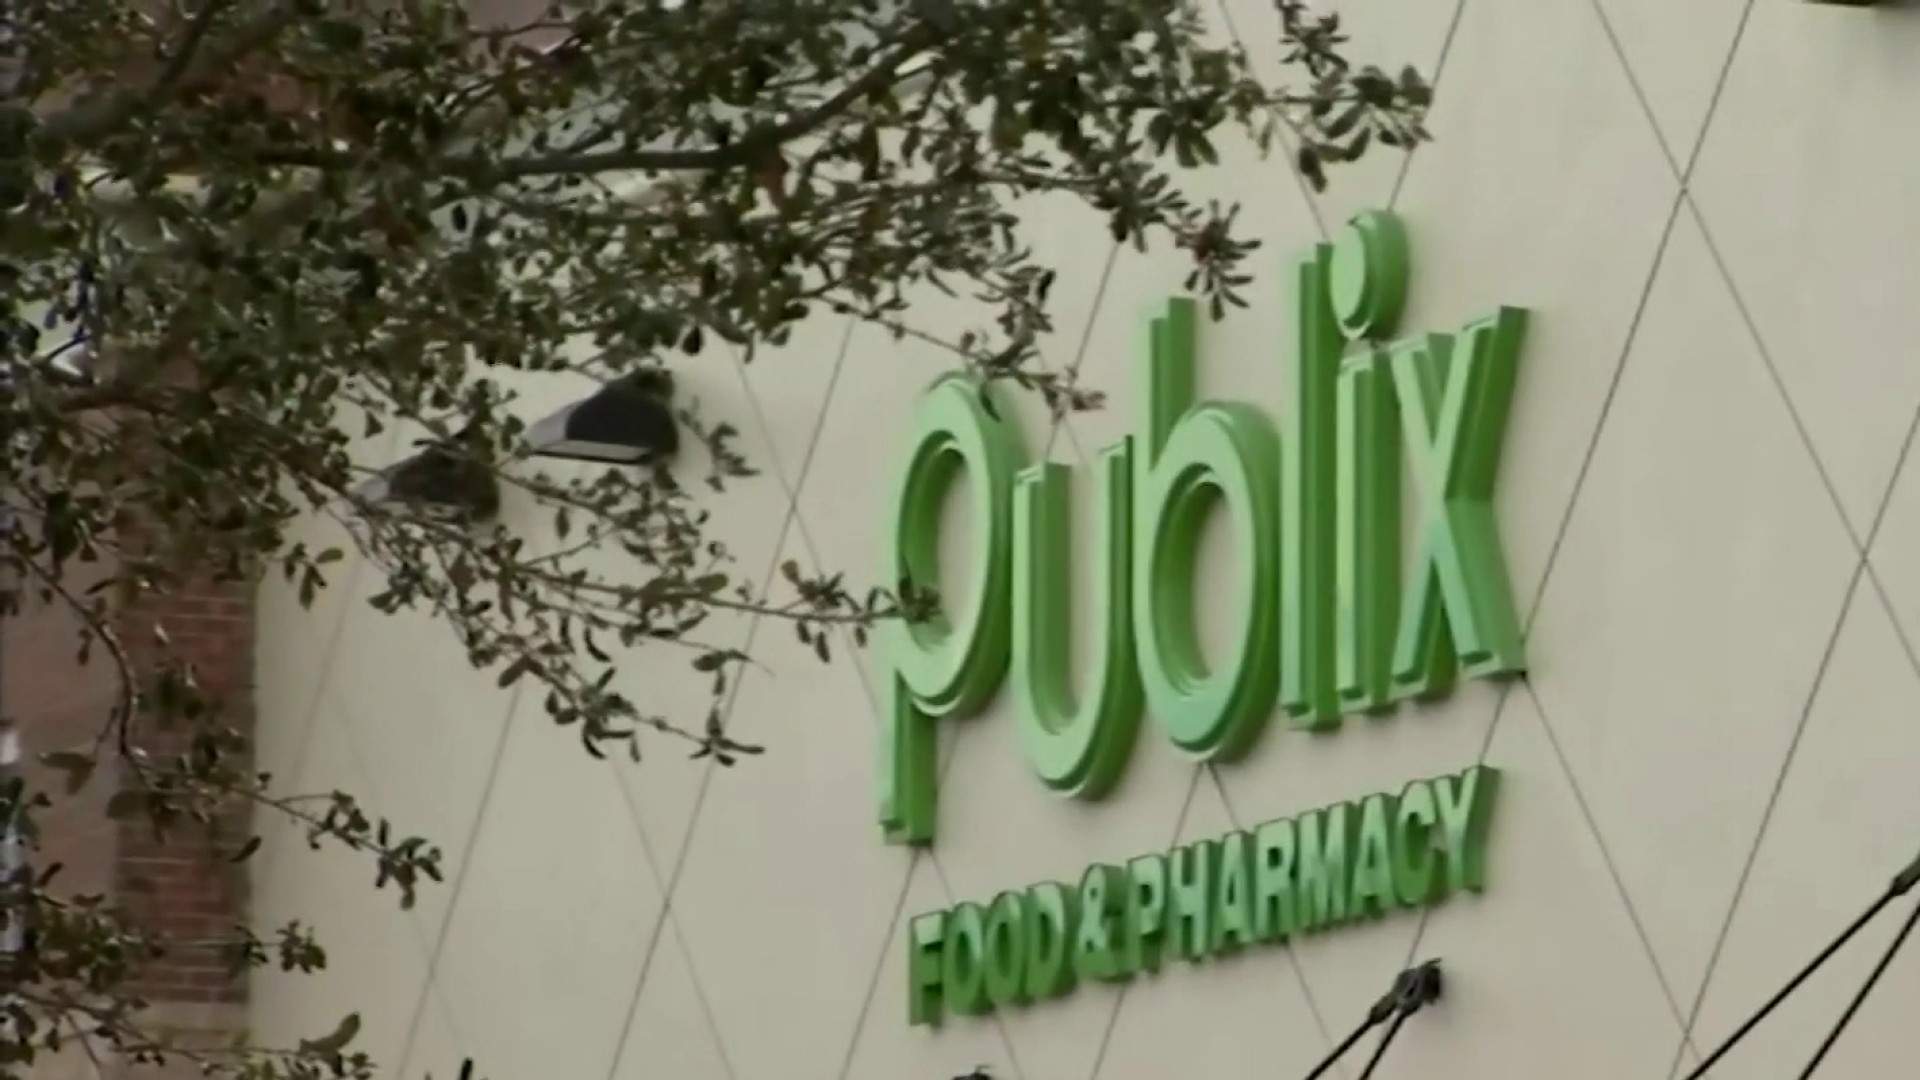 Publix says leftover doses of the COVID-19 vaccine go to employees